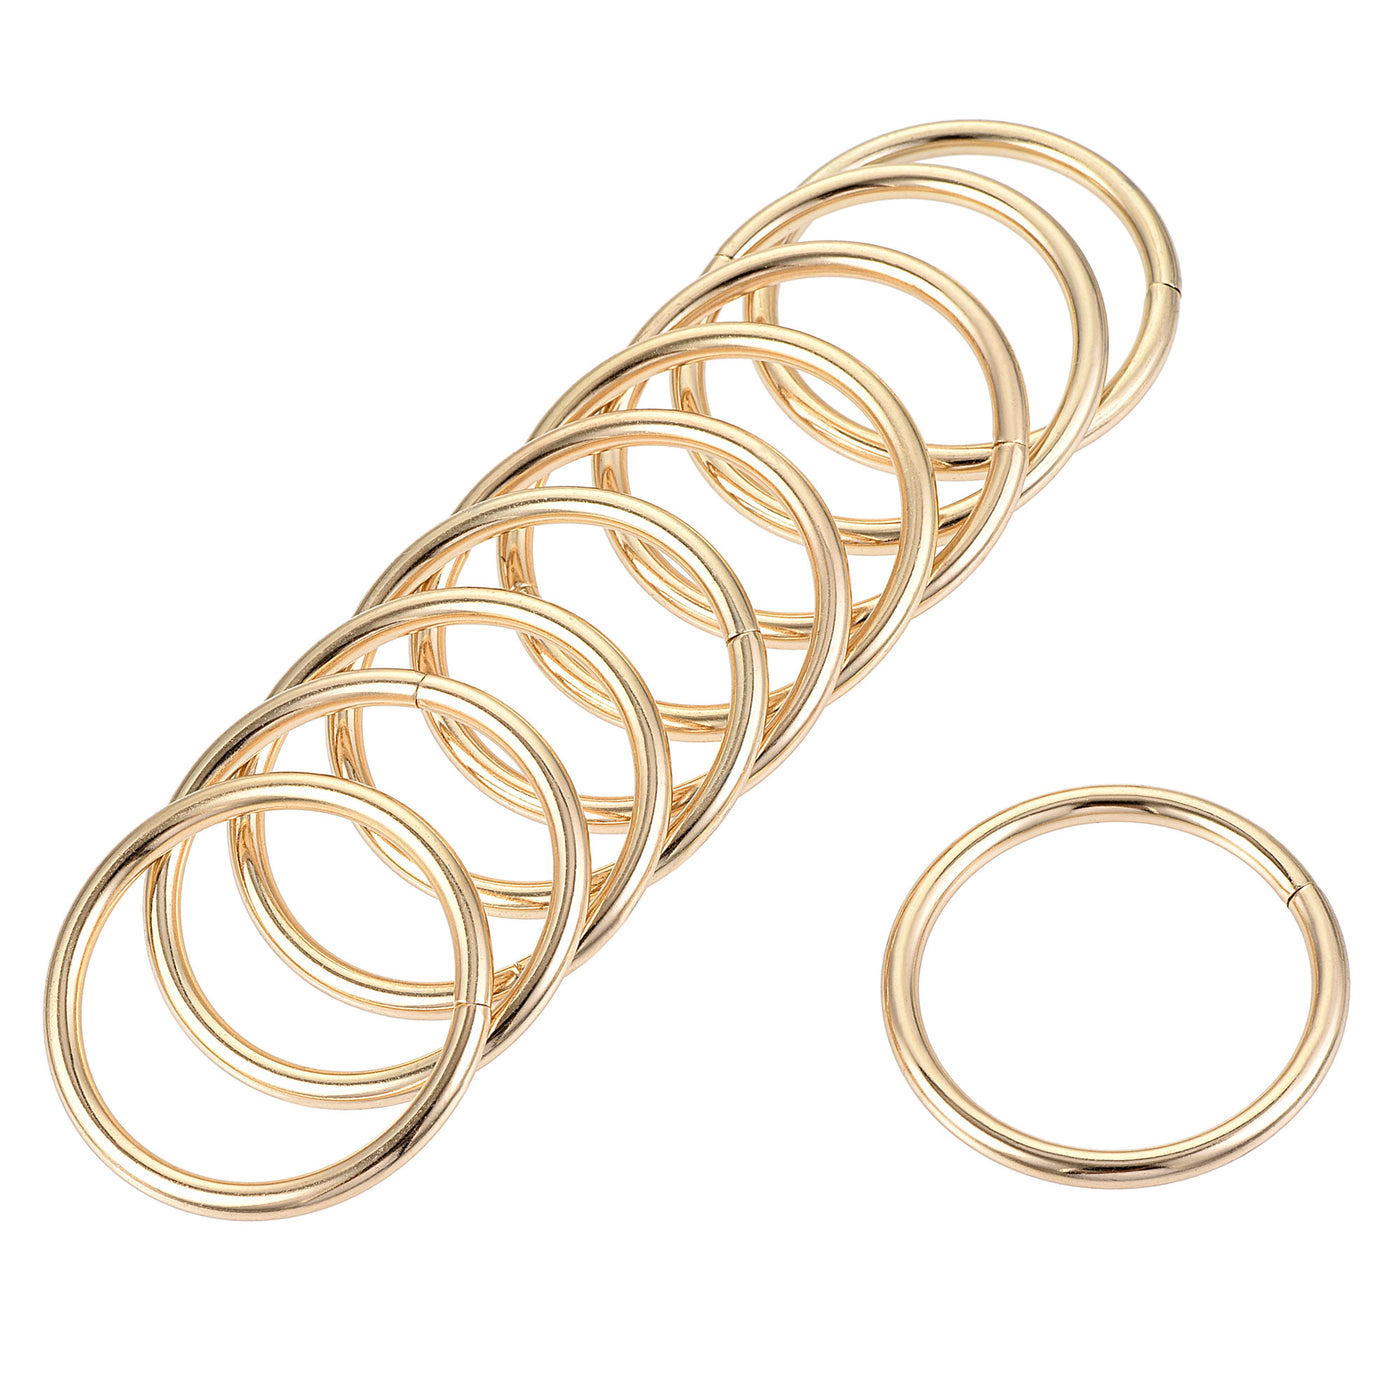 uxcell Uxcell 30mm Metal O Rings Non-Welded for Straps Bags Belts DIY Gold Tone 20pcs